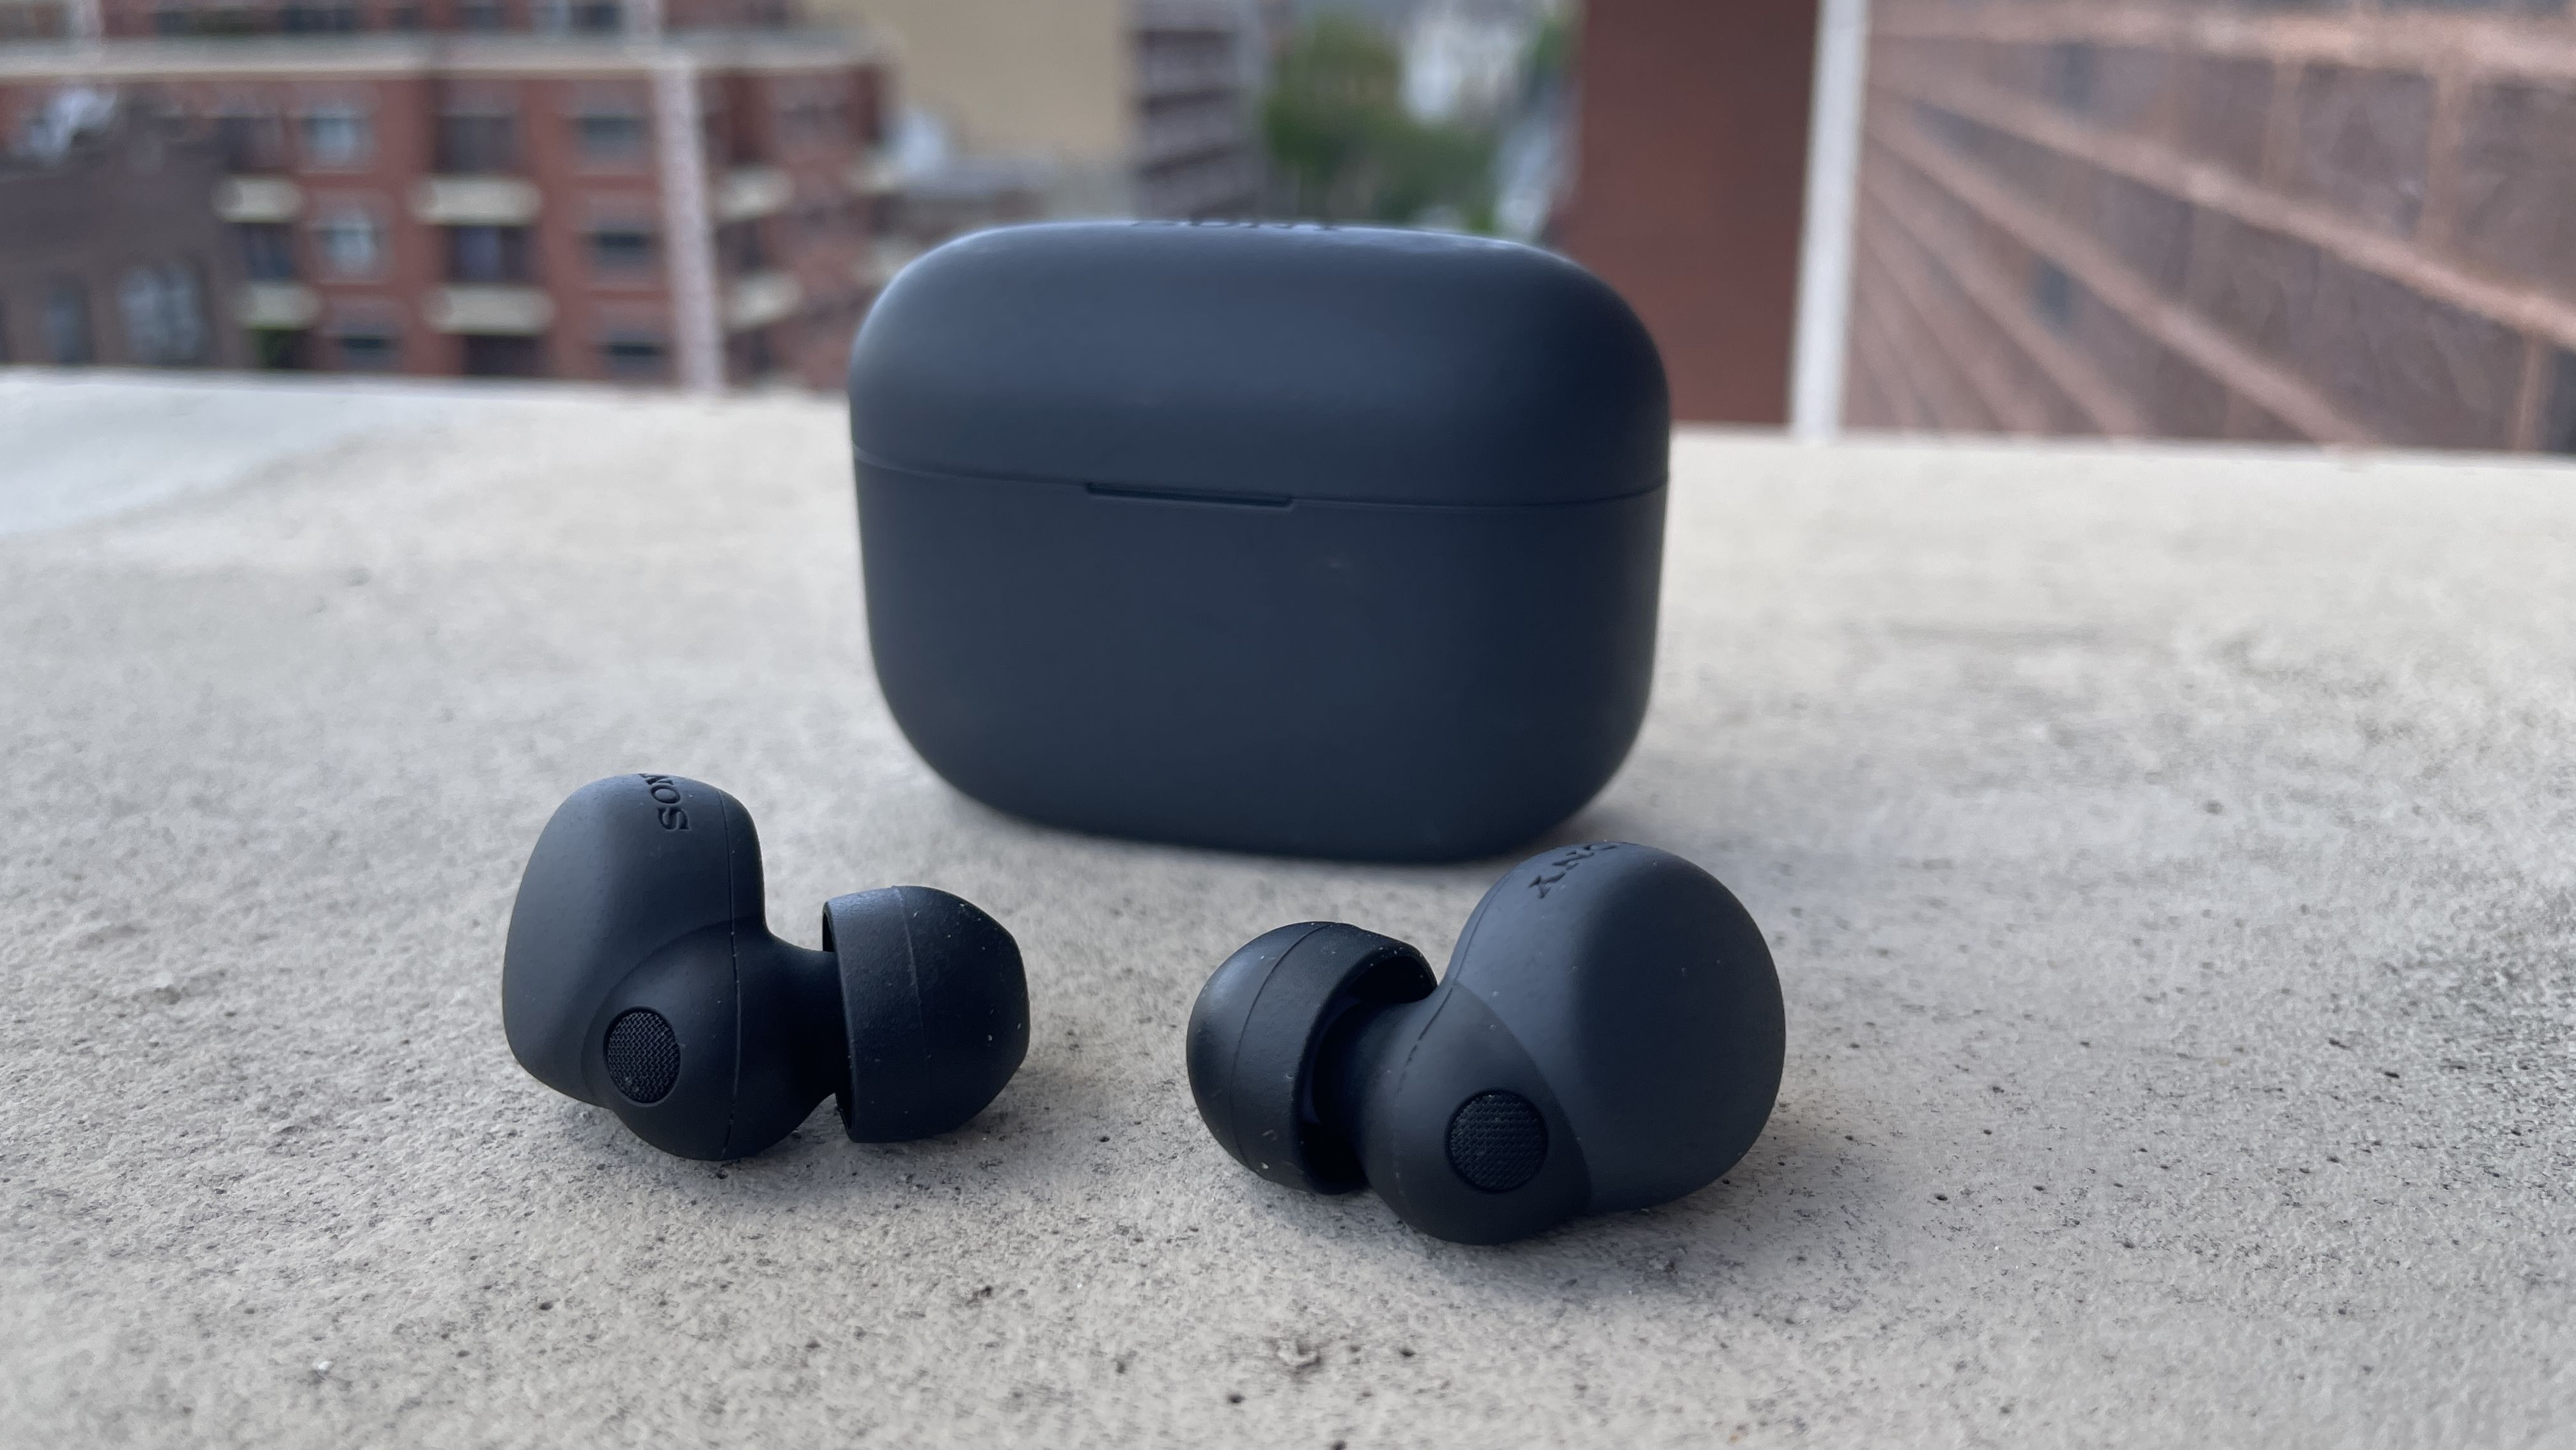 Sony LinkBuds S Earbuds Review